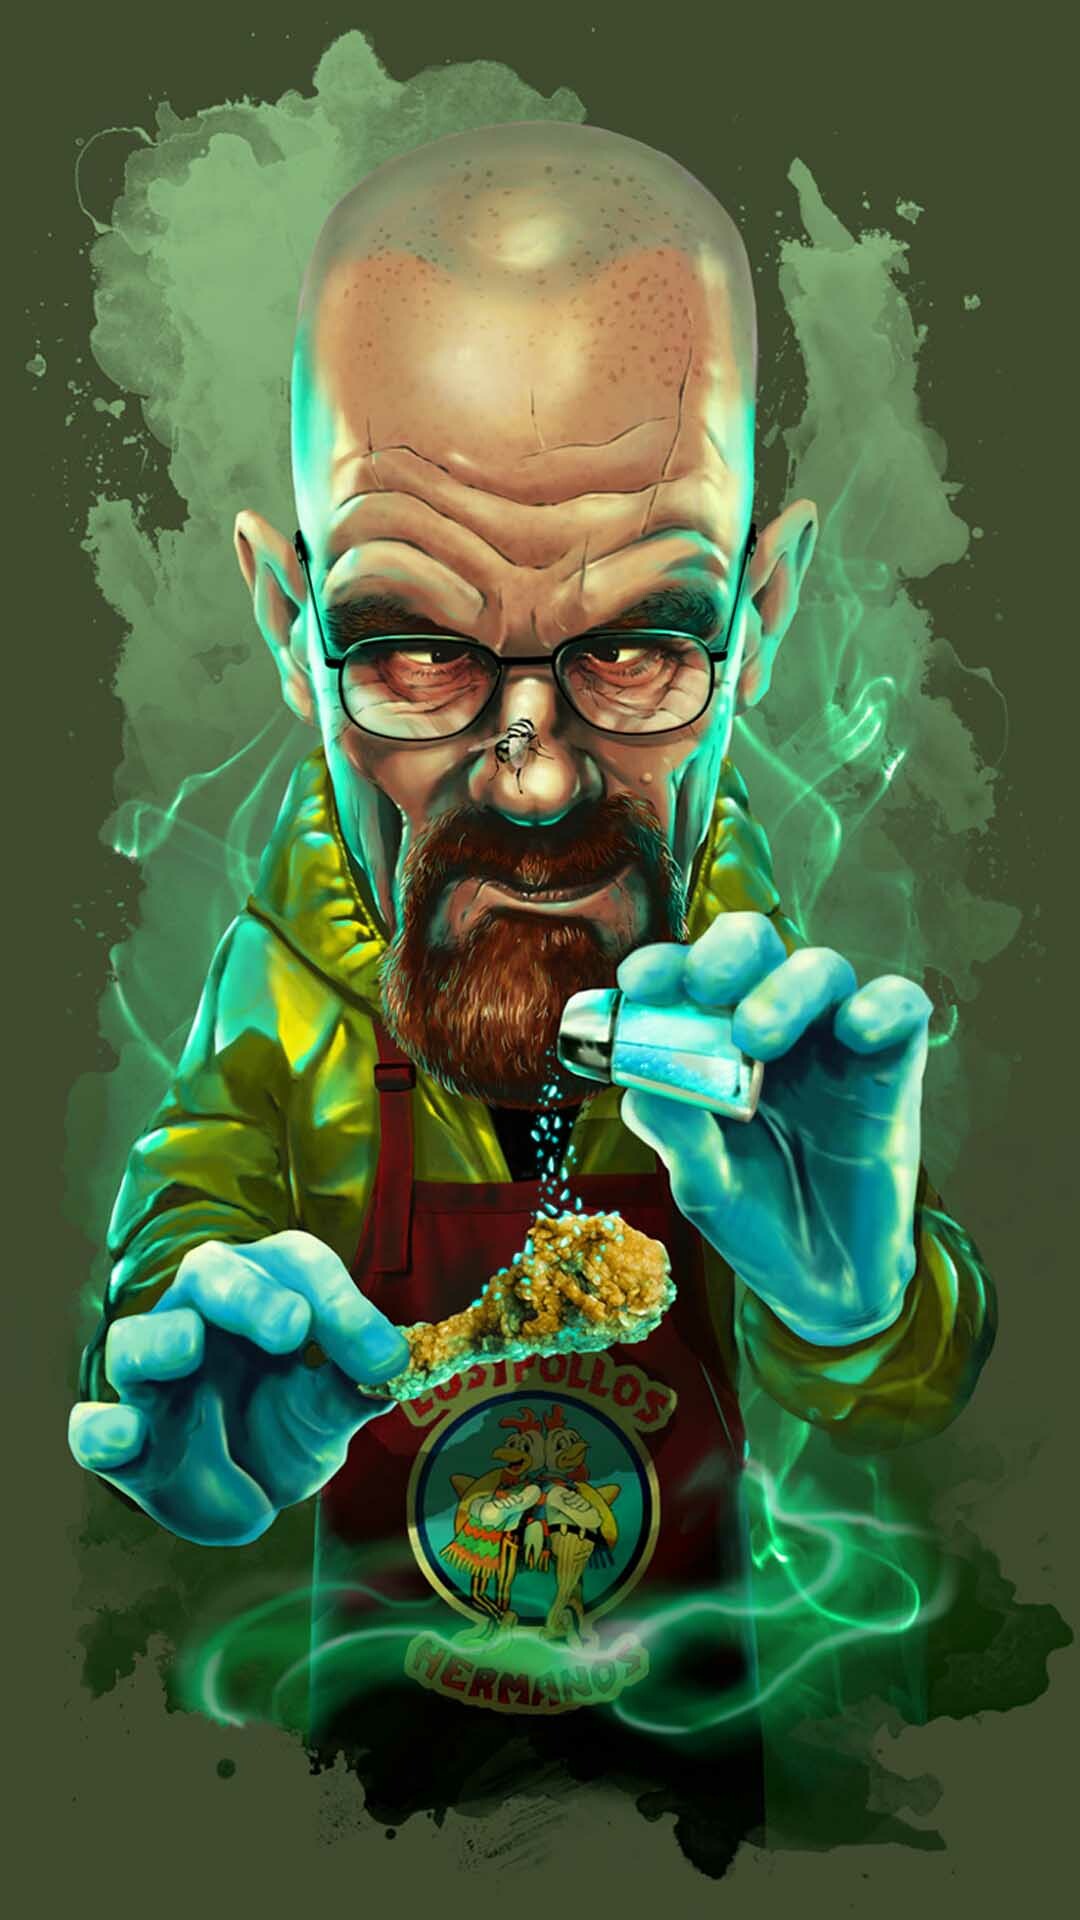 Breaking Bad Wallpaper: HD, 4K, 5K for PC and Mobile. Download free image for iPhone, Android